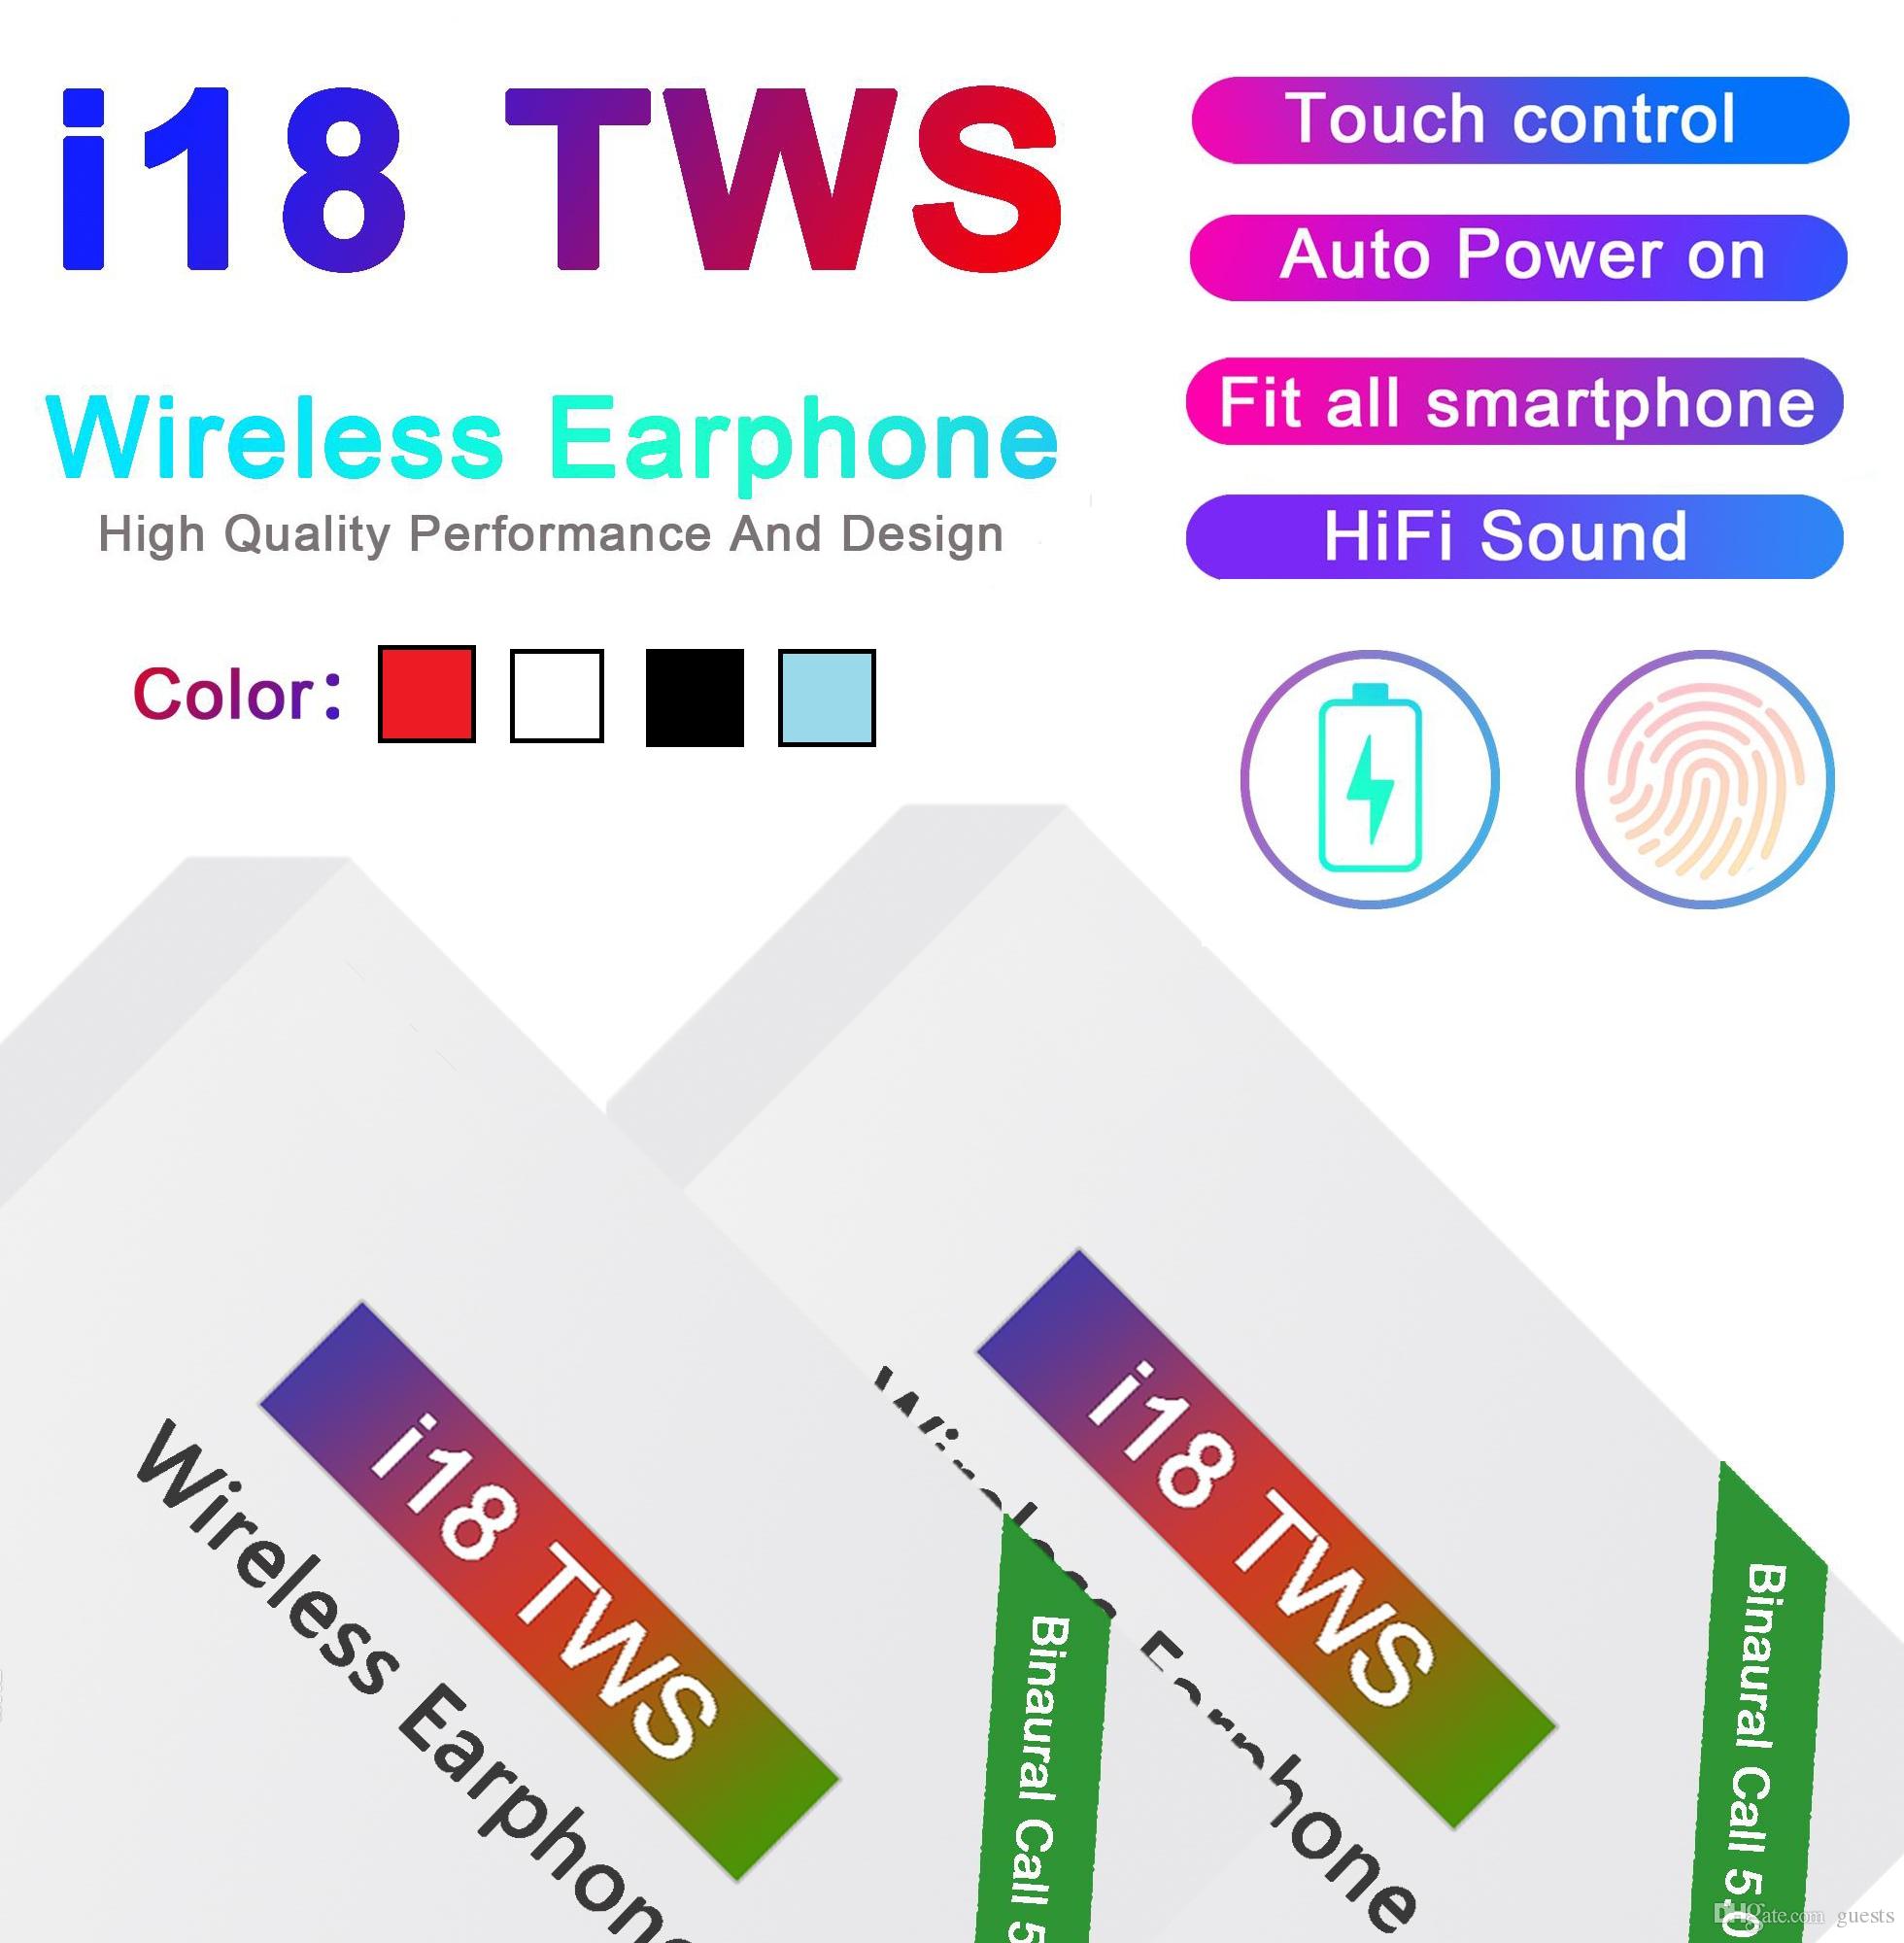 i18 tws Touch 5.0 wireless Bluetooth Headphones with pop up window Stereo Earphones Auto Power ON Auto paring fast delivery